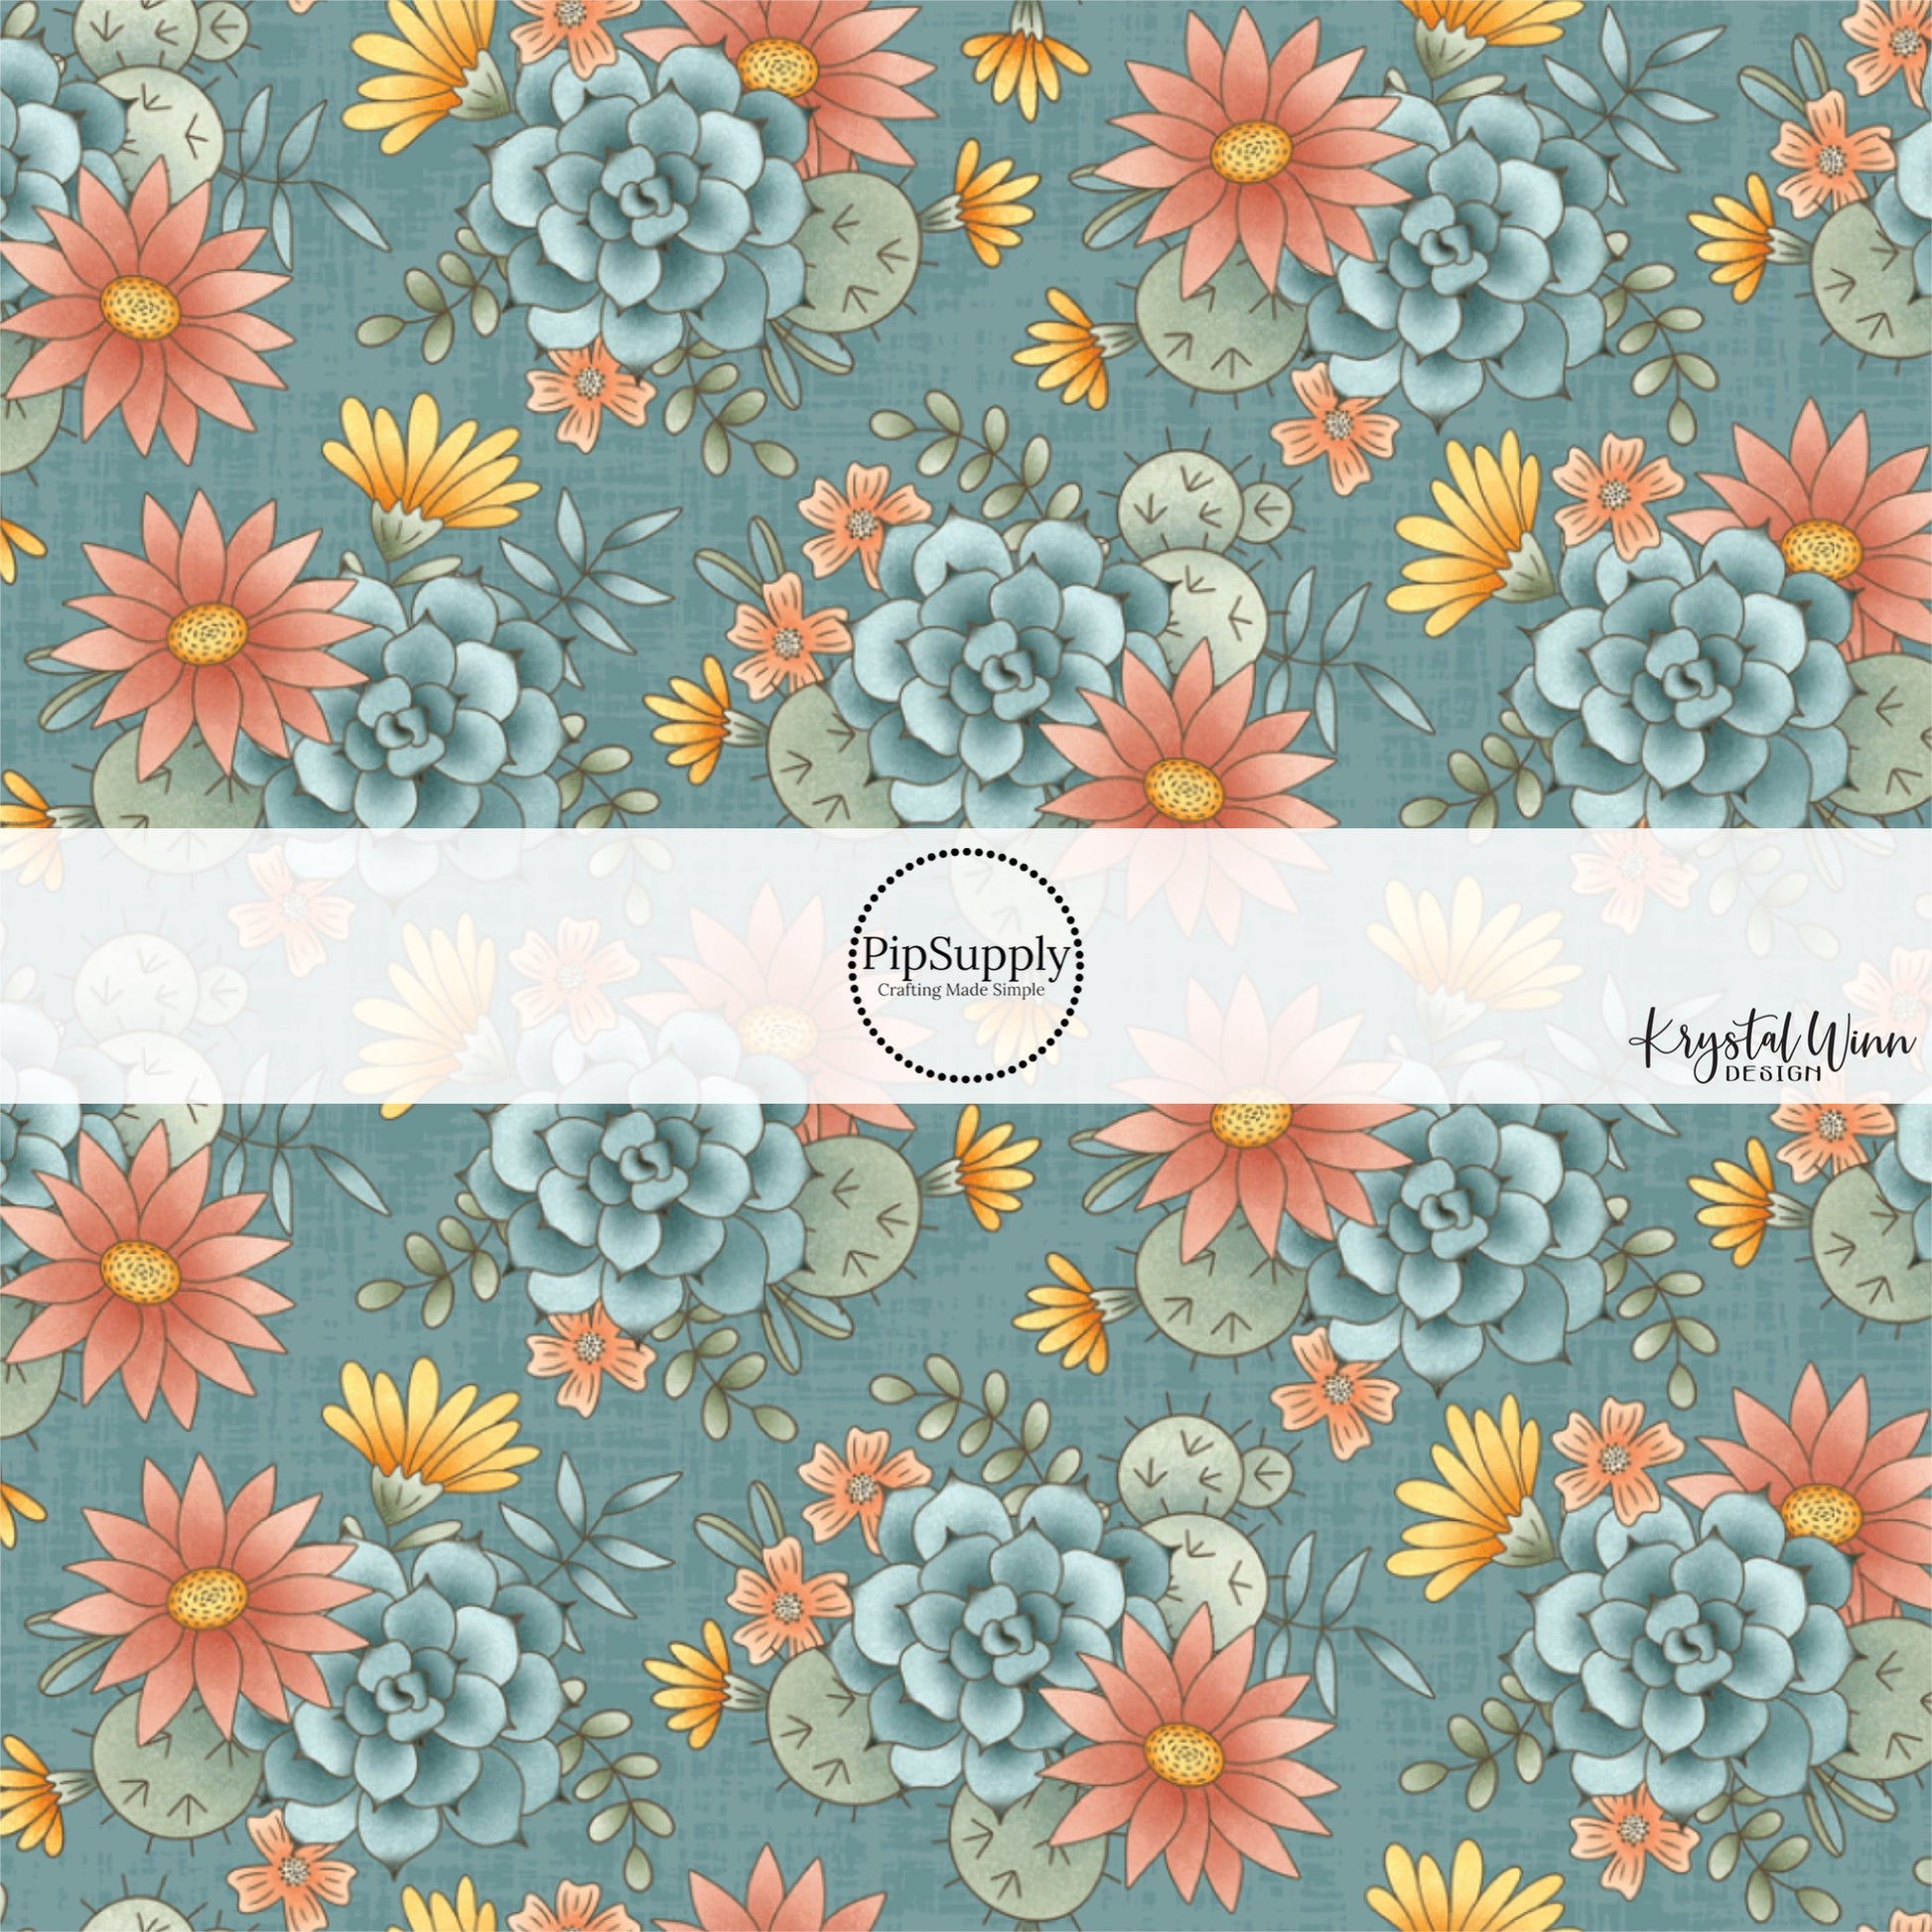 Desert Floral on Denim Fabric By The Yard